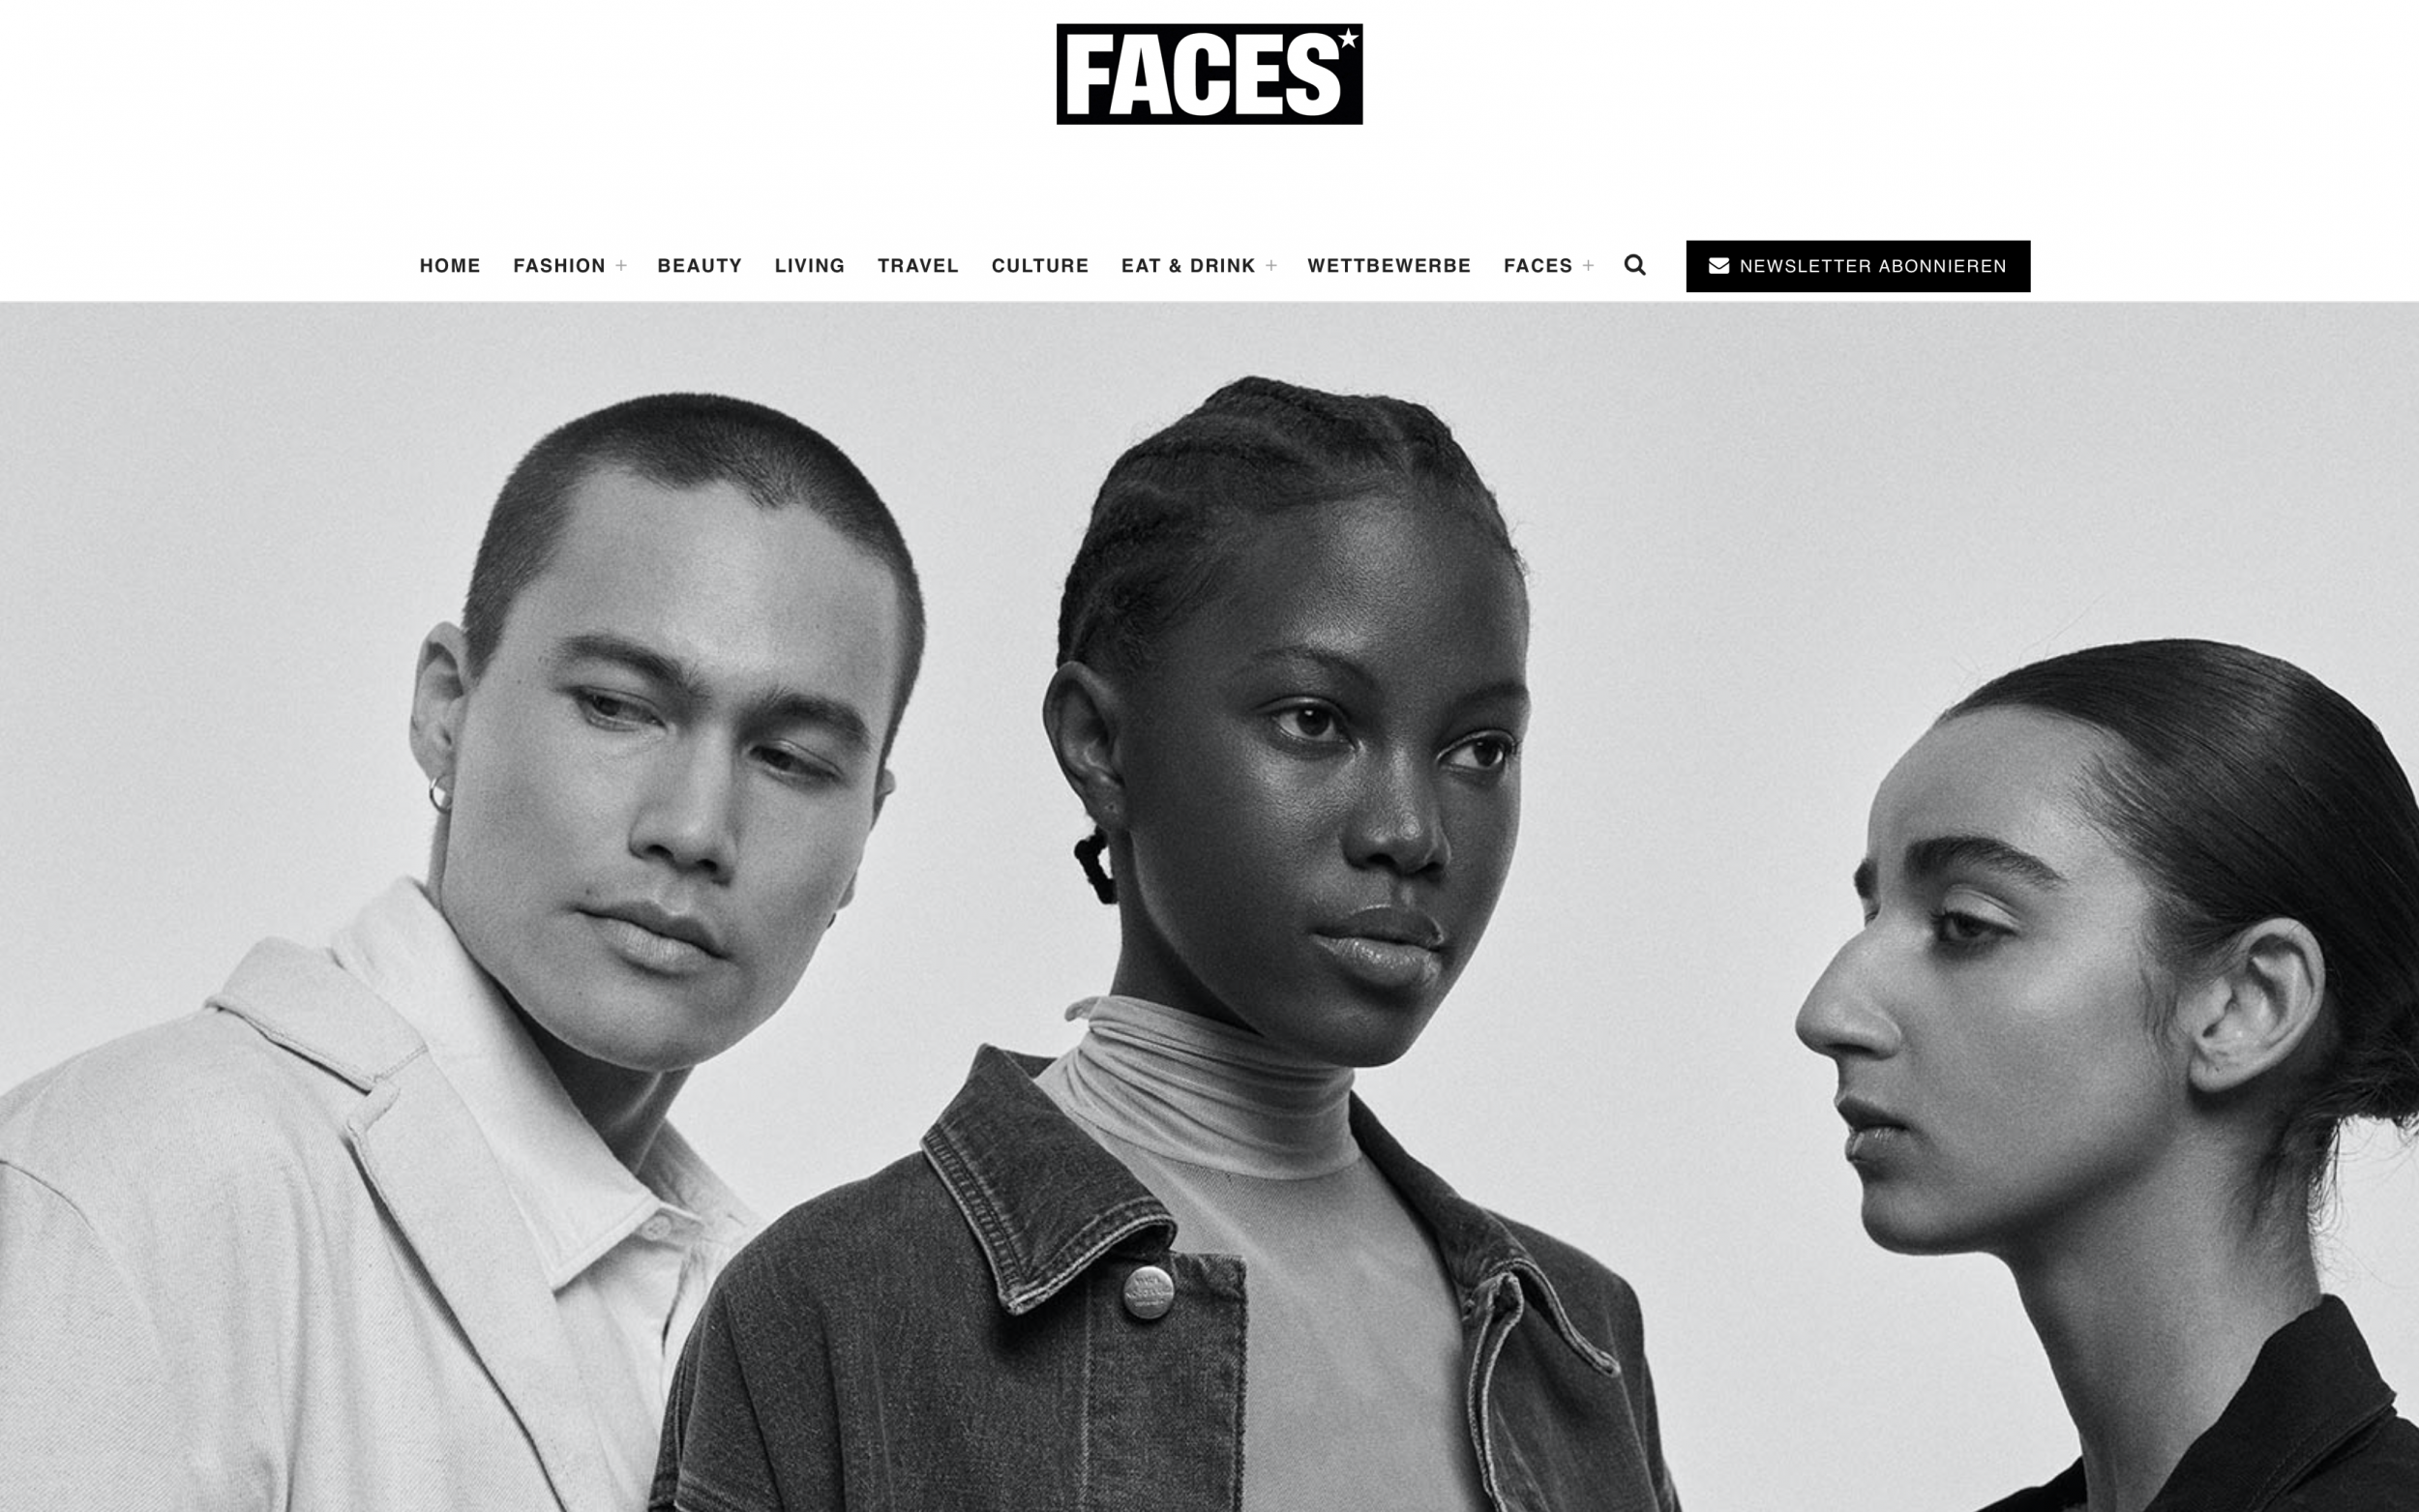 connection faces magazine (18 images) by Mike Meyer Photography